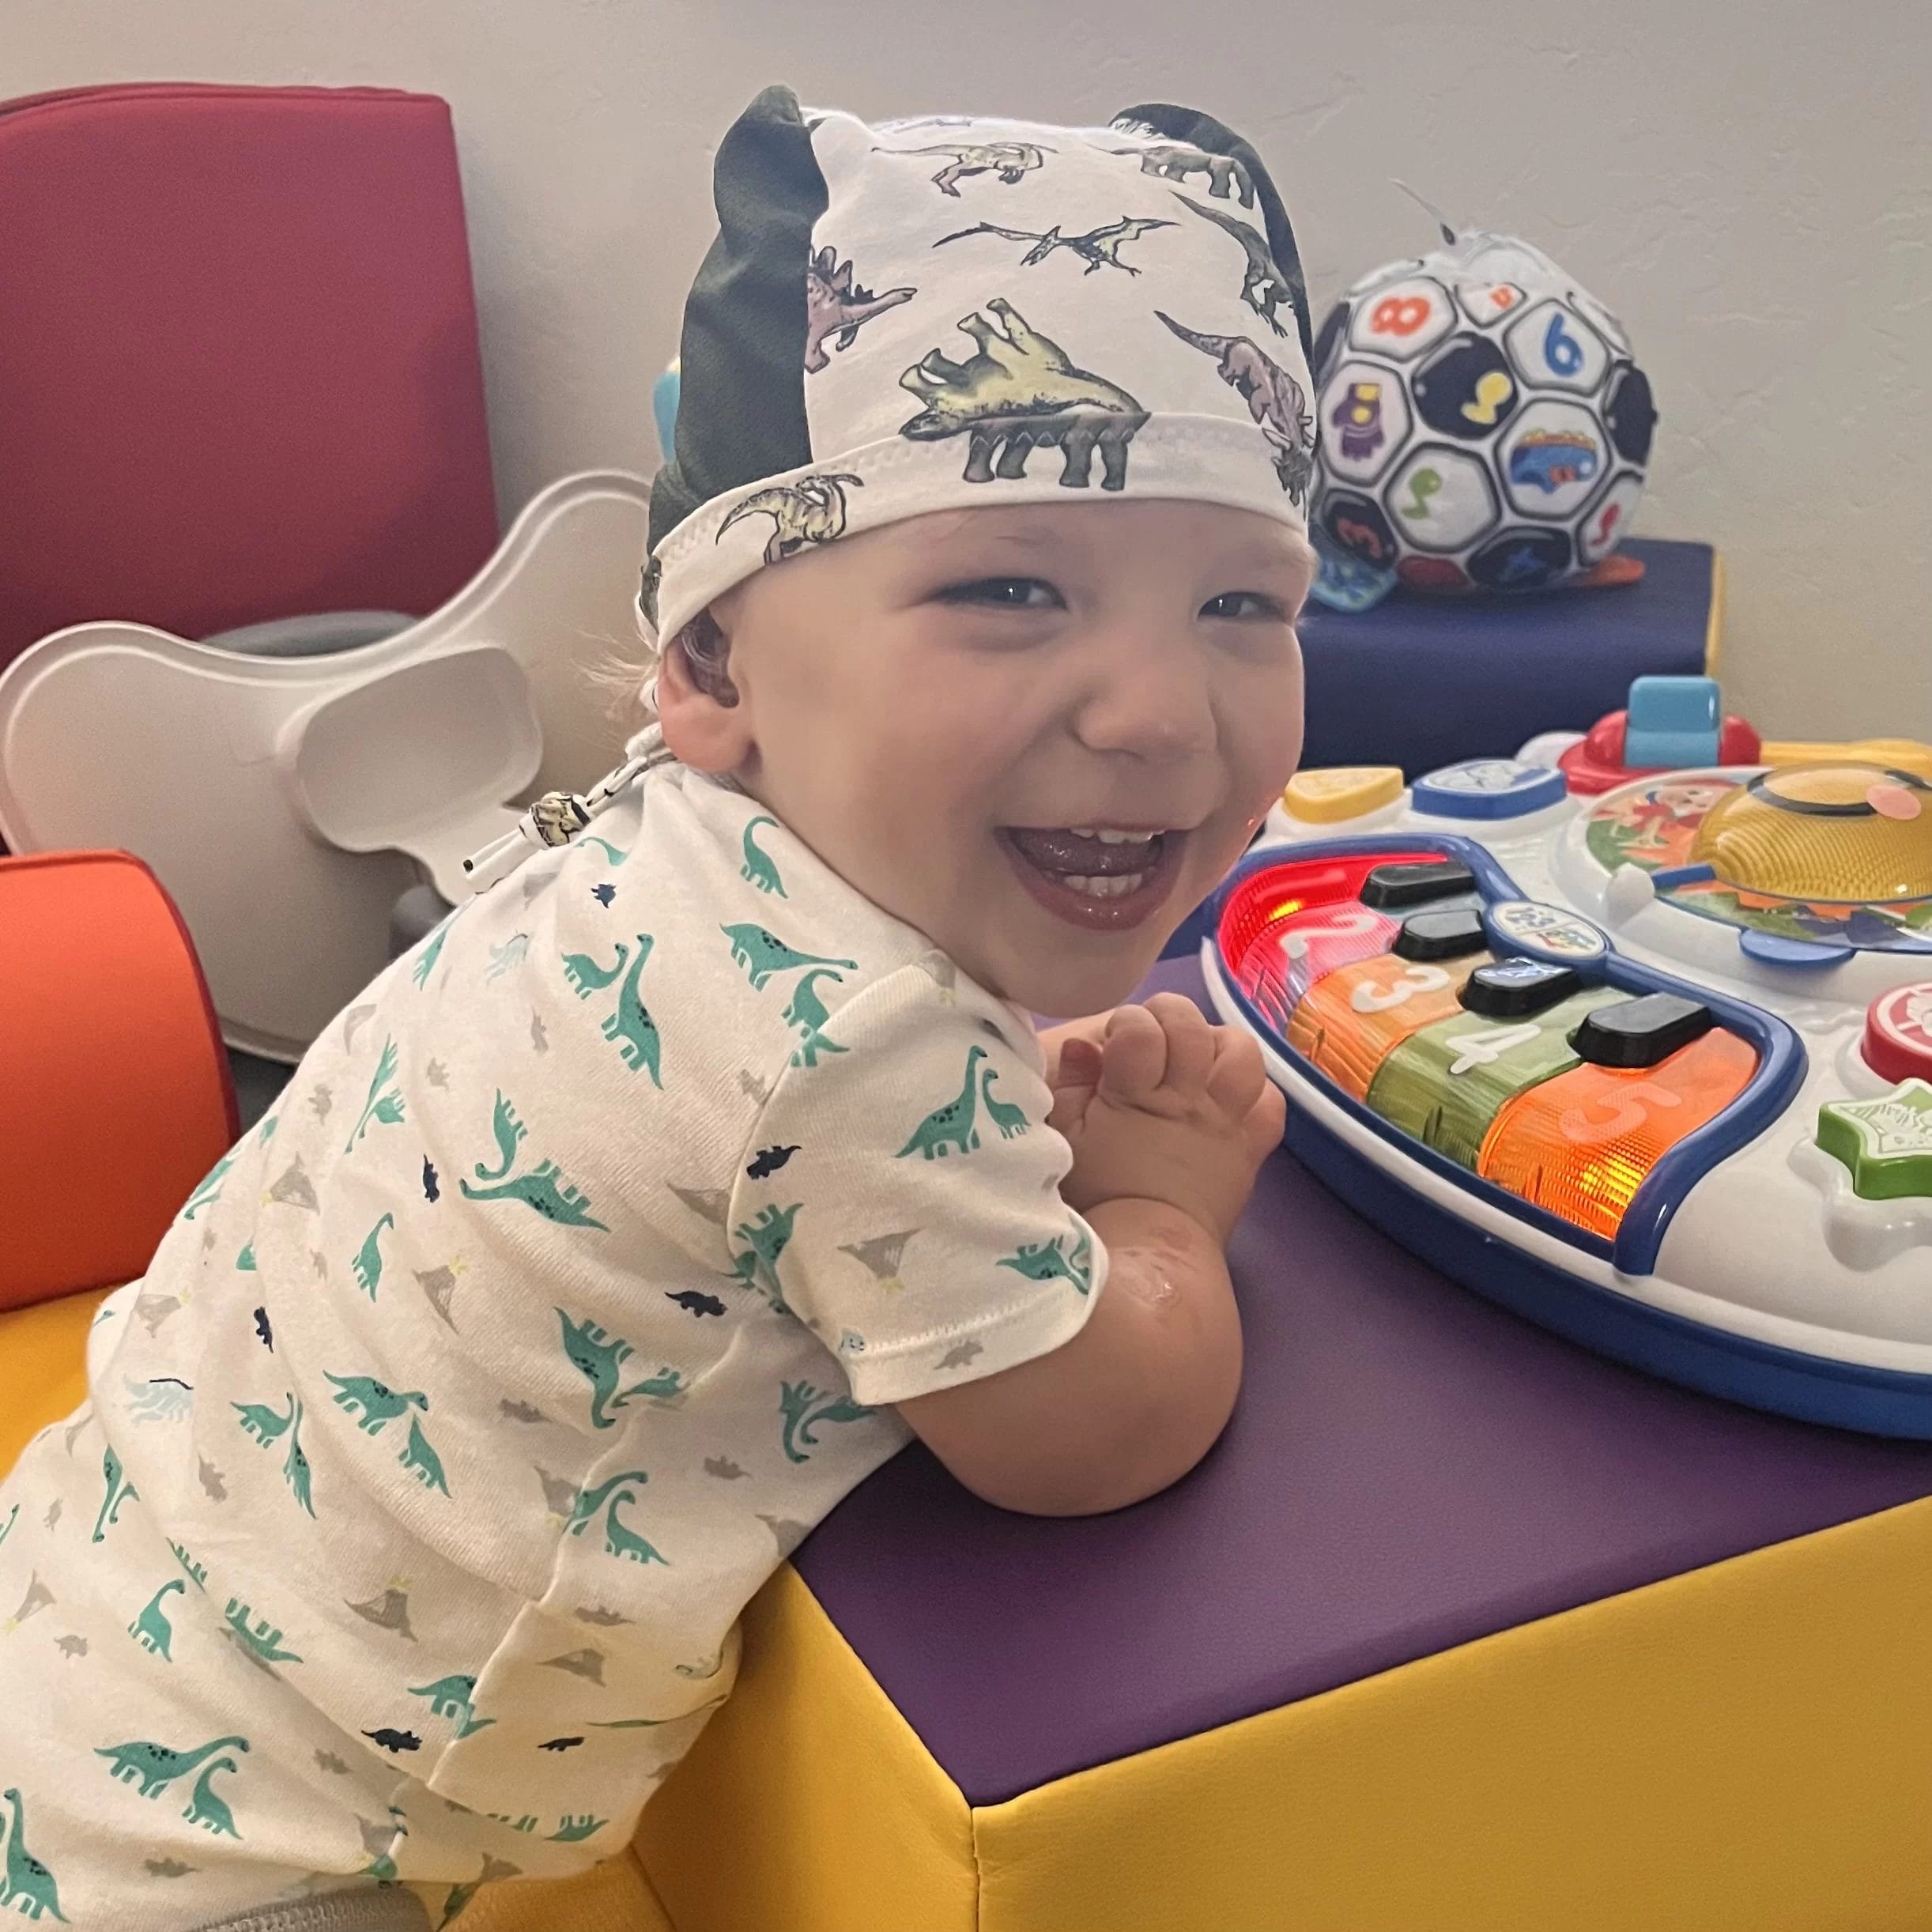 Keywords: pediatric therapy, early learning centerA baby engages in pediatric therapy and early learning at an early learning center while playing with a toy.